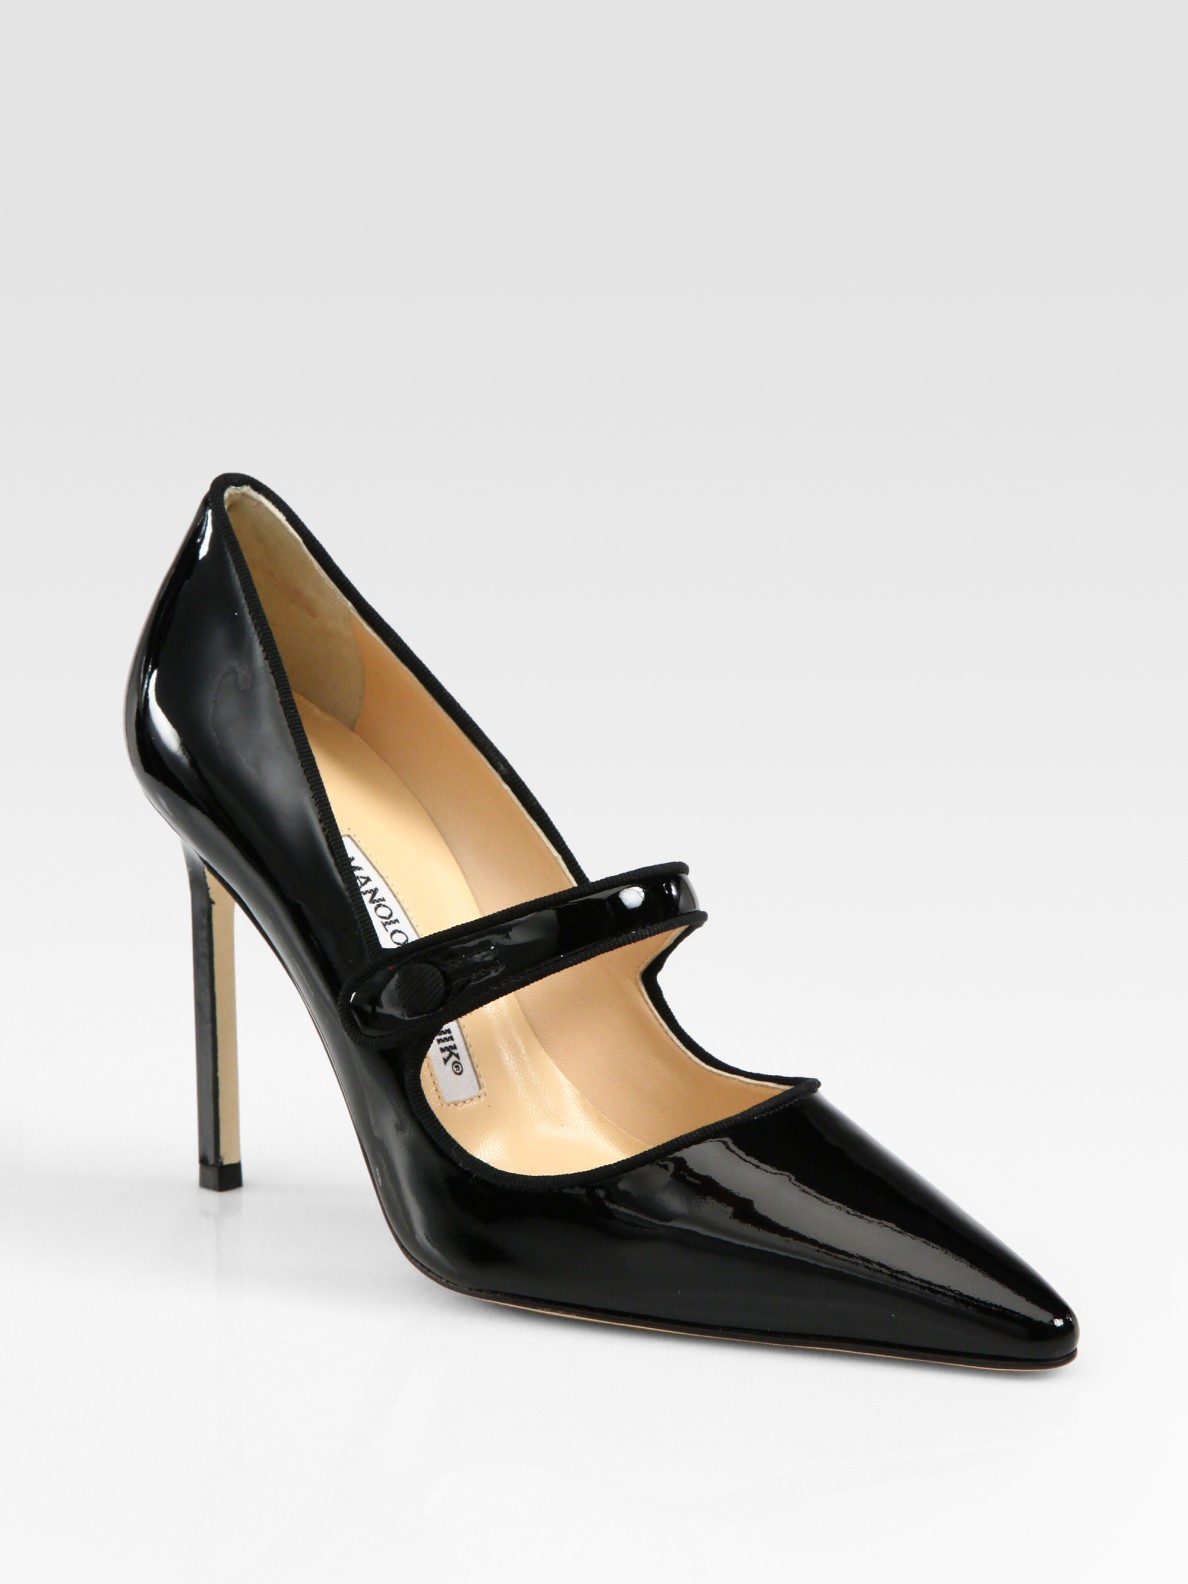 Lyst - Manolo Blahnik Patent Leather Mary Jane Point Toe Pumps in Black